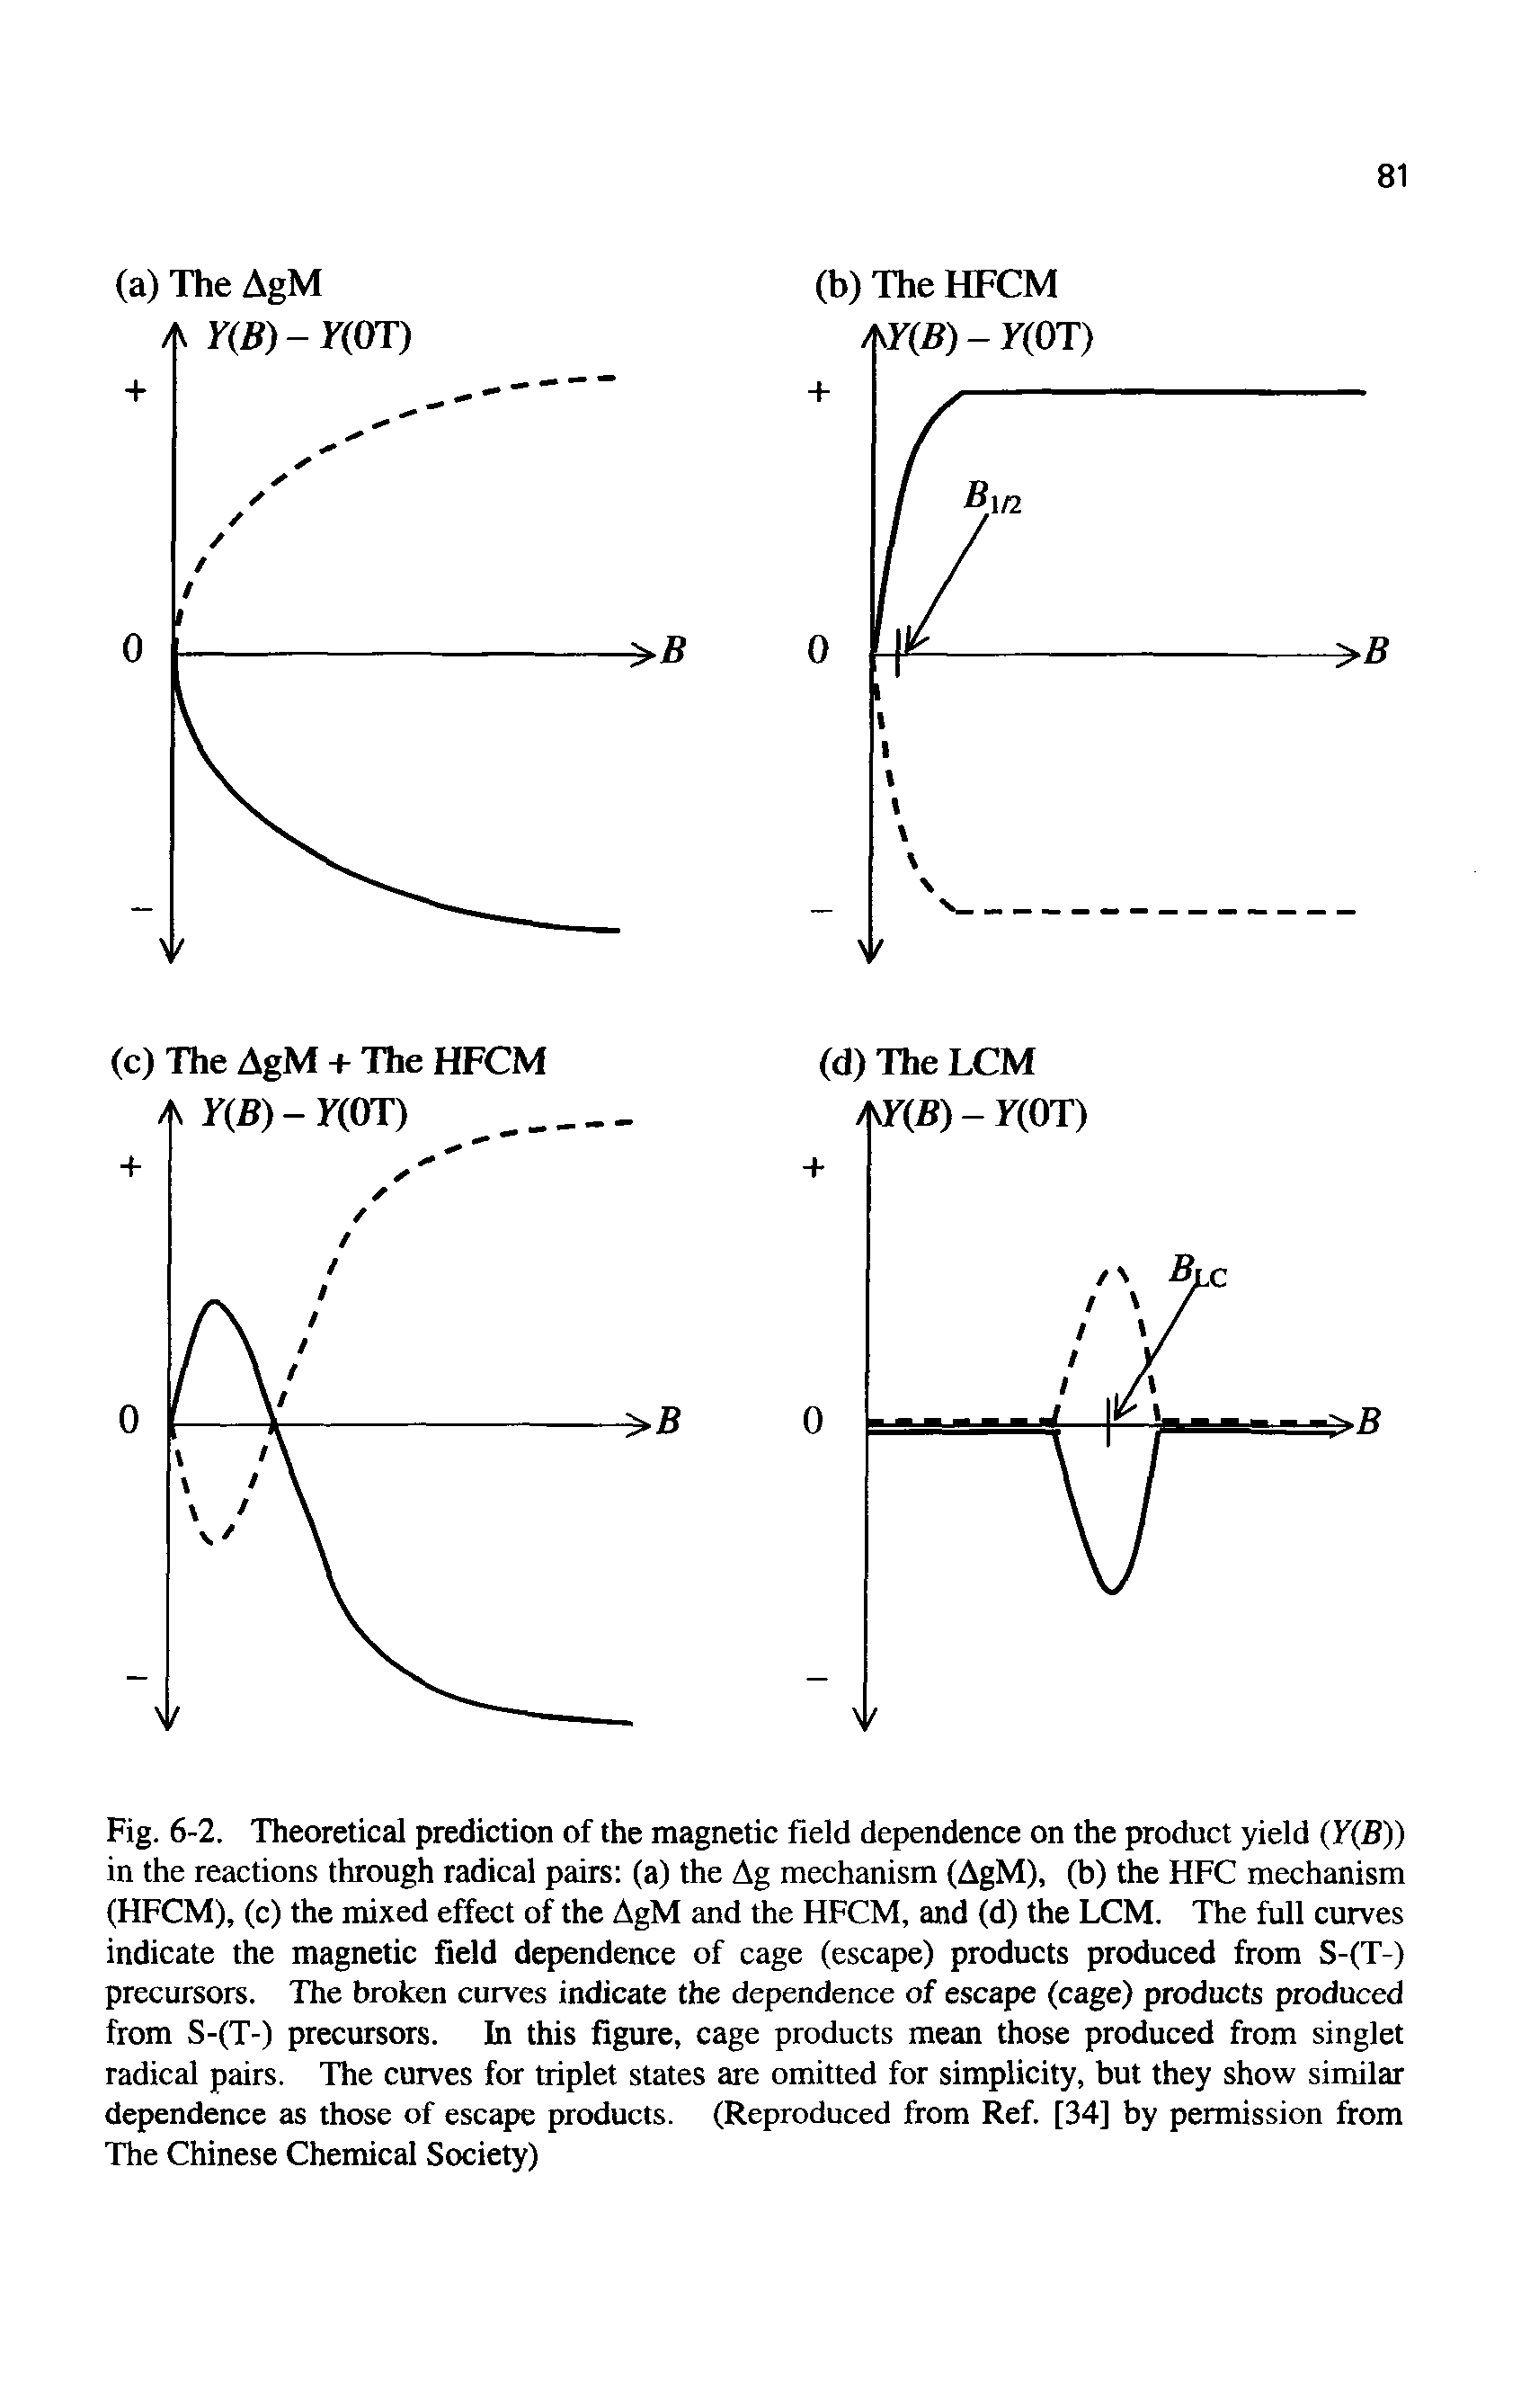 Fig. 6-2. Theoretical prediction of the magnetic field dependence on the product yield (7(5)) in the reactions through radical pairs (a) the Ag mechanism (AgM), (b) the HFC mechanism (HFCM), (c) the mixed effect of the AgM and the HFCM, and (d) the LCM. The full curves indicate the magnetic field dependence of cage (escape) products produced from S-(T-) precursors. The broken curves indicate the dependence of escape (cage) products produced from S-(T-) precursors. In this figure, cage products mean those produced from singlet radical pairs. The curves for triplet states are omitted for simplicity, but they show similar dependence as those of escape products. (Reproduced from Ref. [34] by permission from The Chinese Chemical Society)...